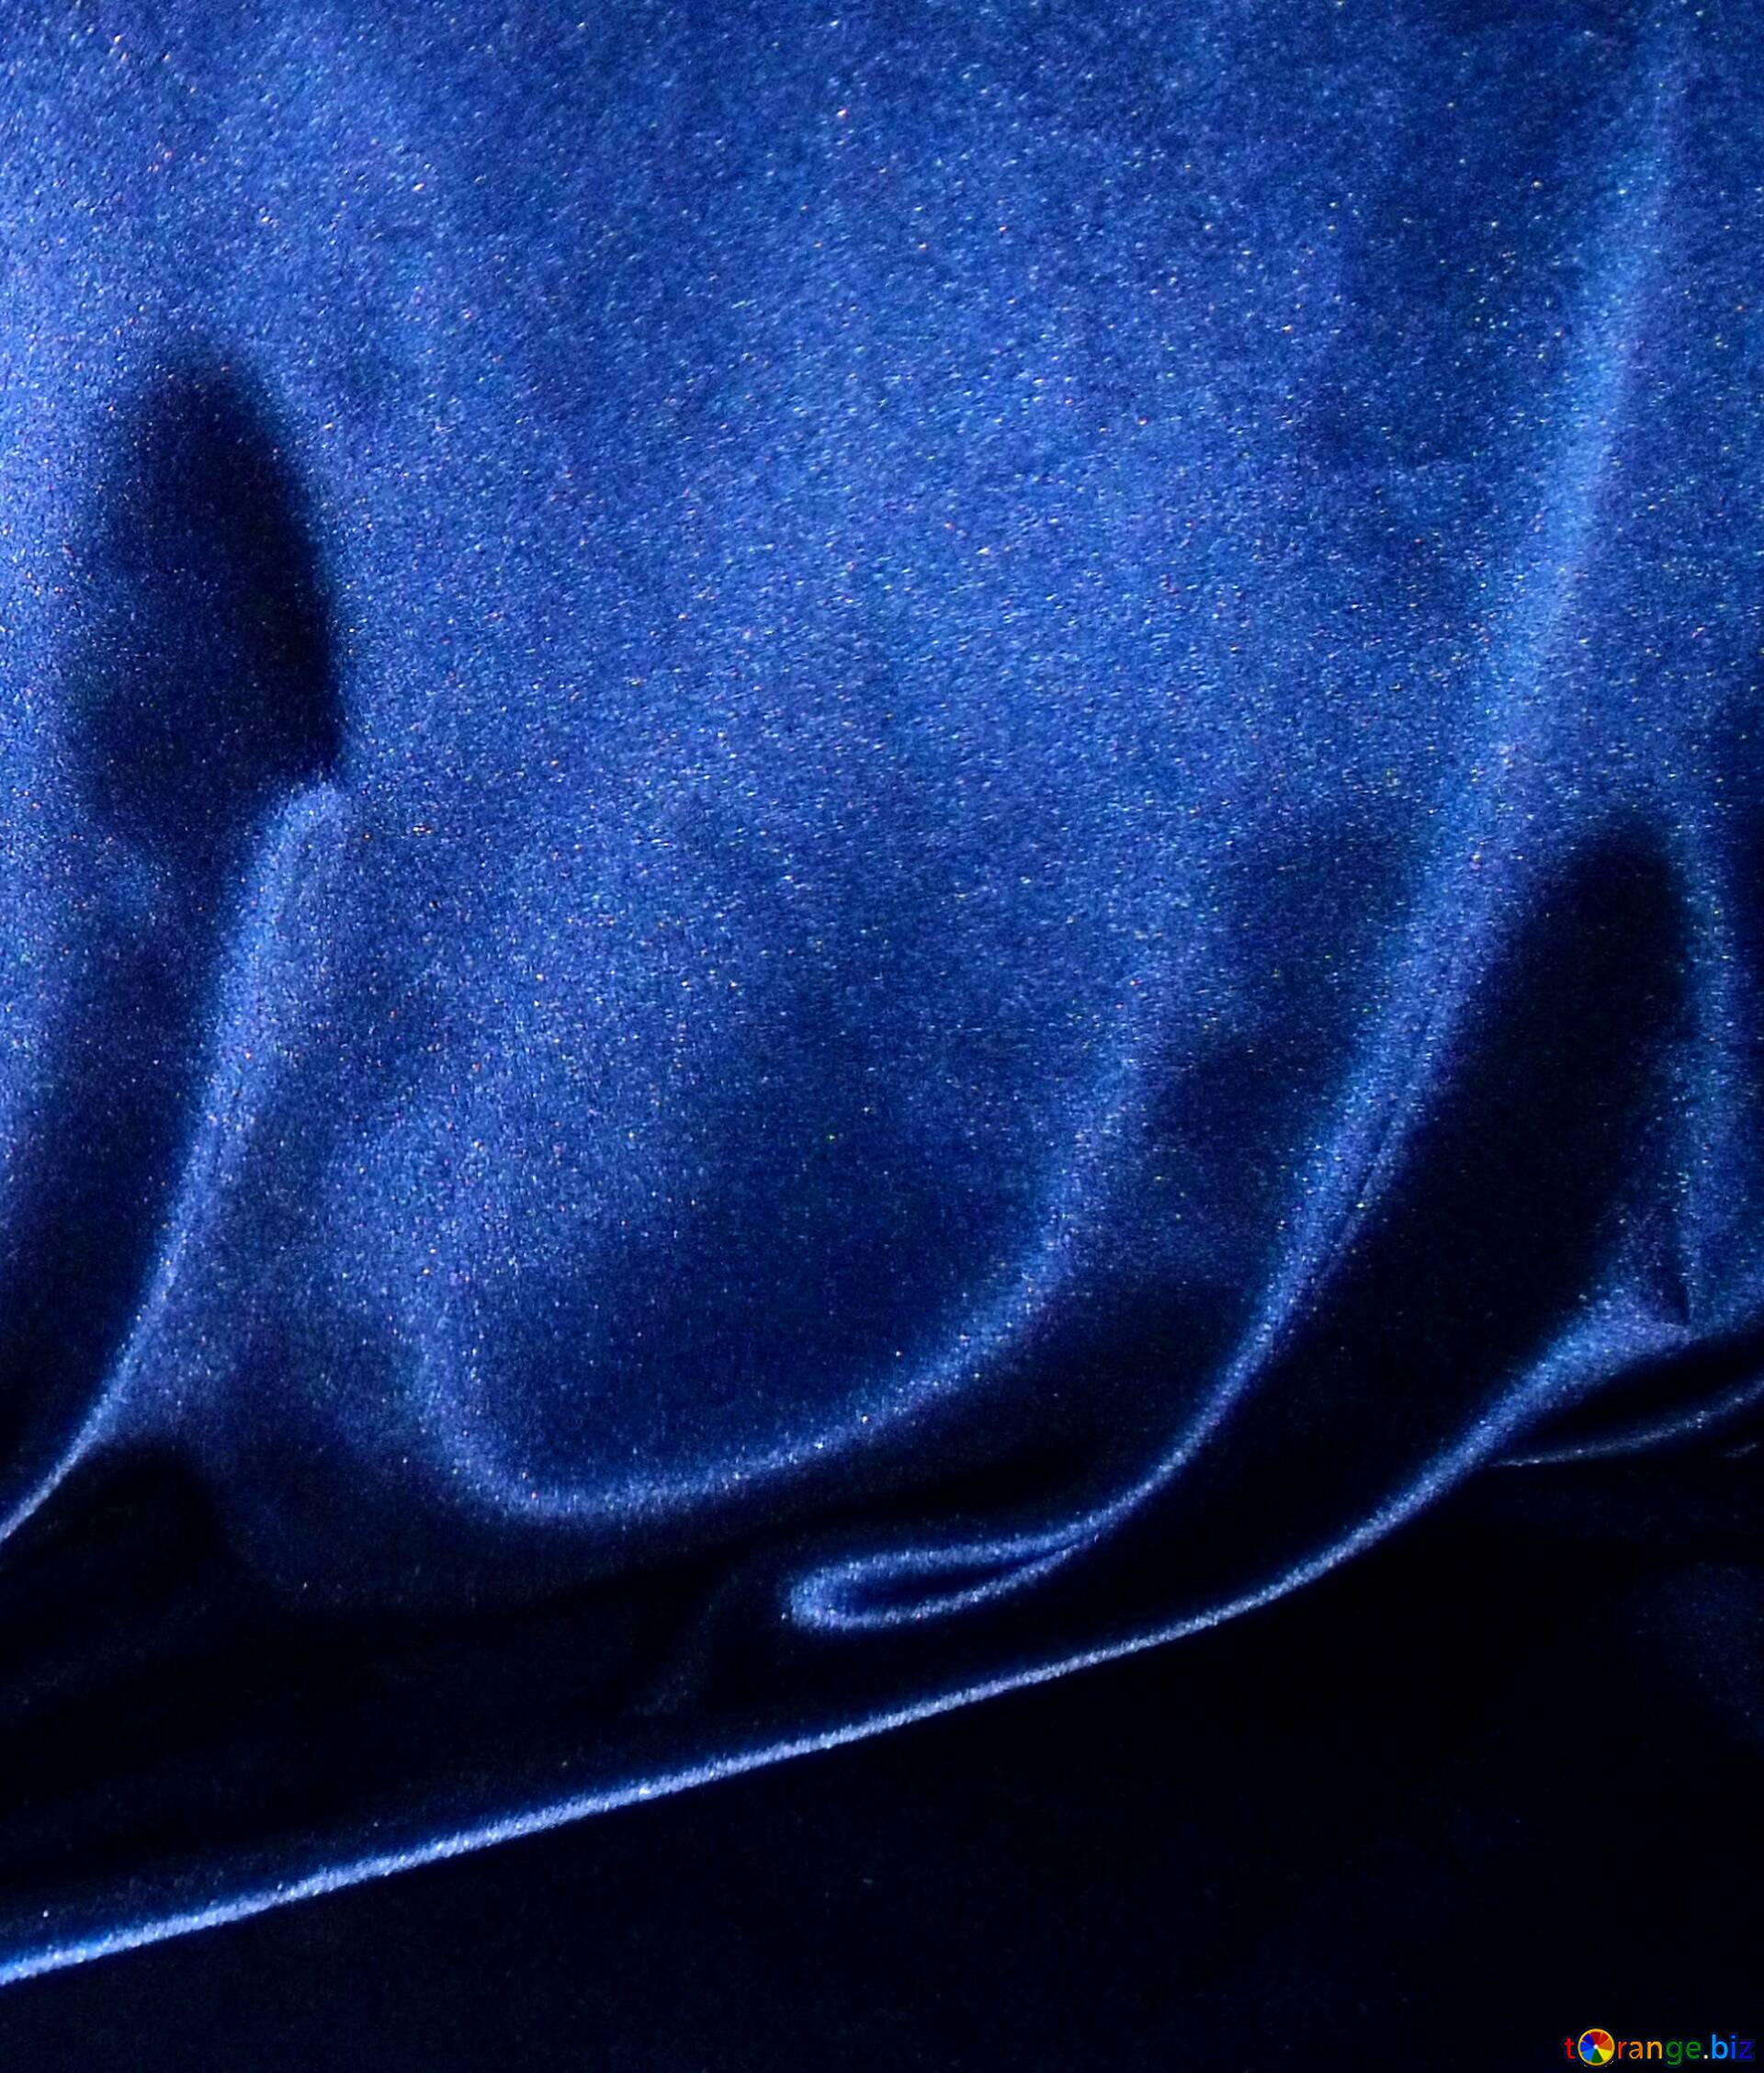 Download free picture Background dark blue fabric on CC-BY License ~ Free  Image Stock  ~ fx №77641